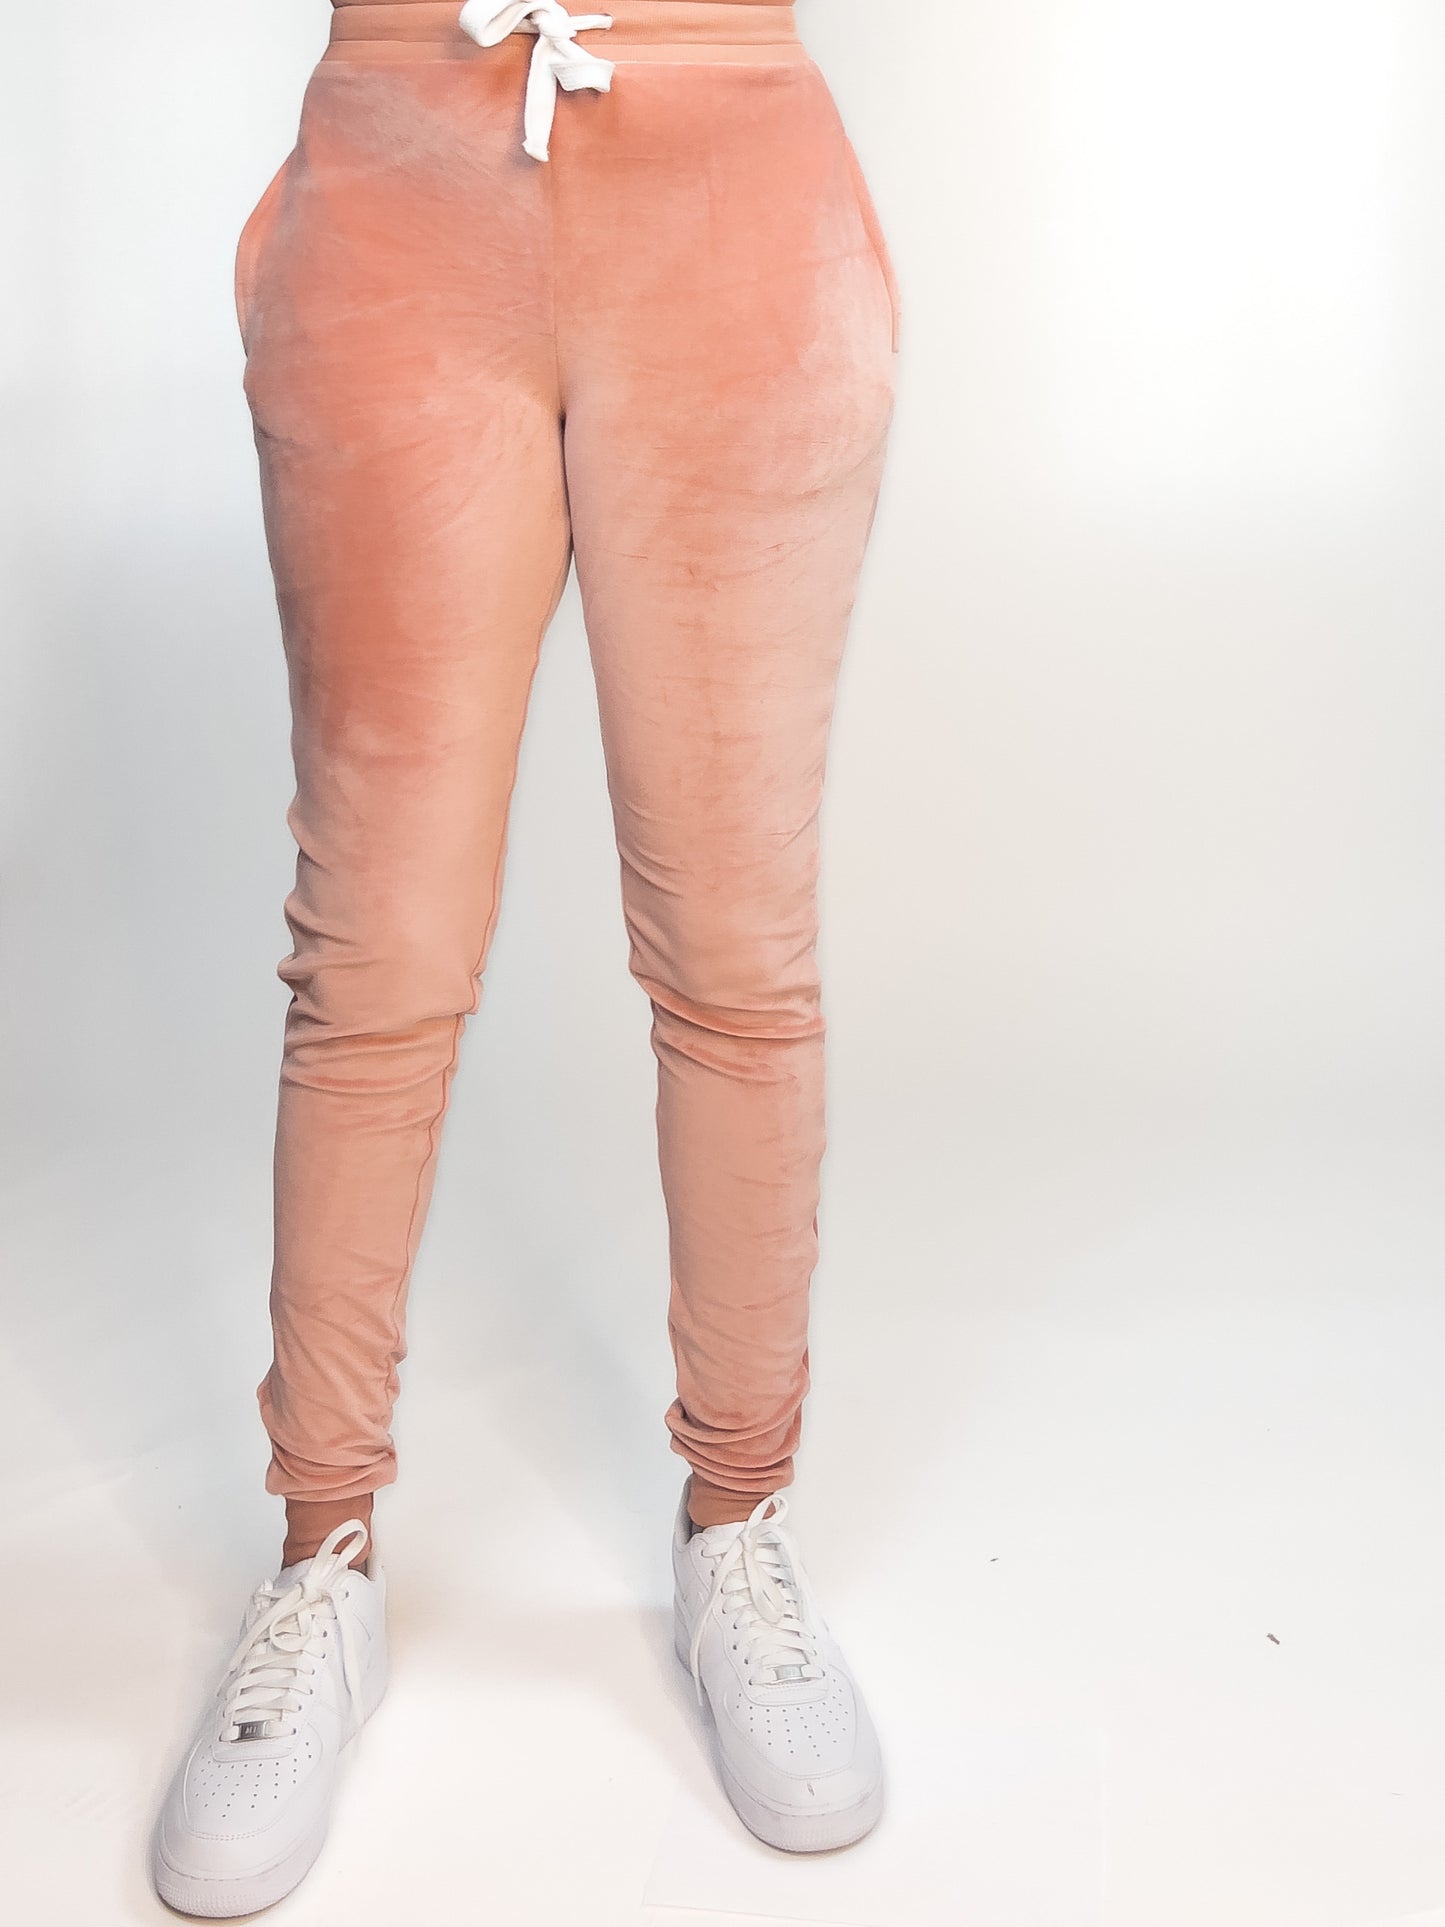 rose pink velour pants for tall women and girls with extended length, offering both comfort and style